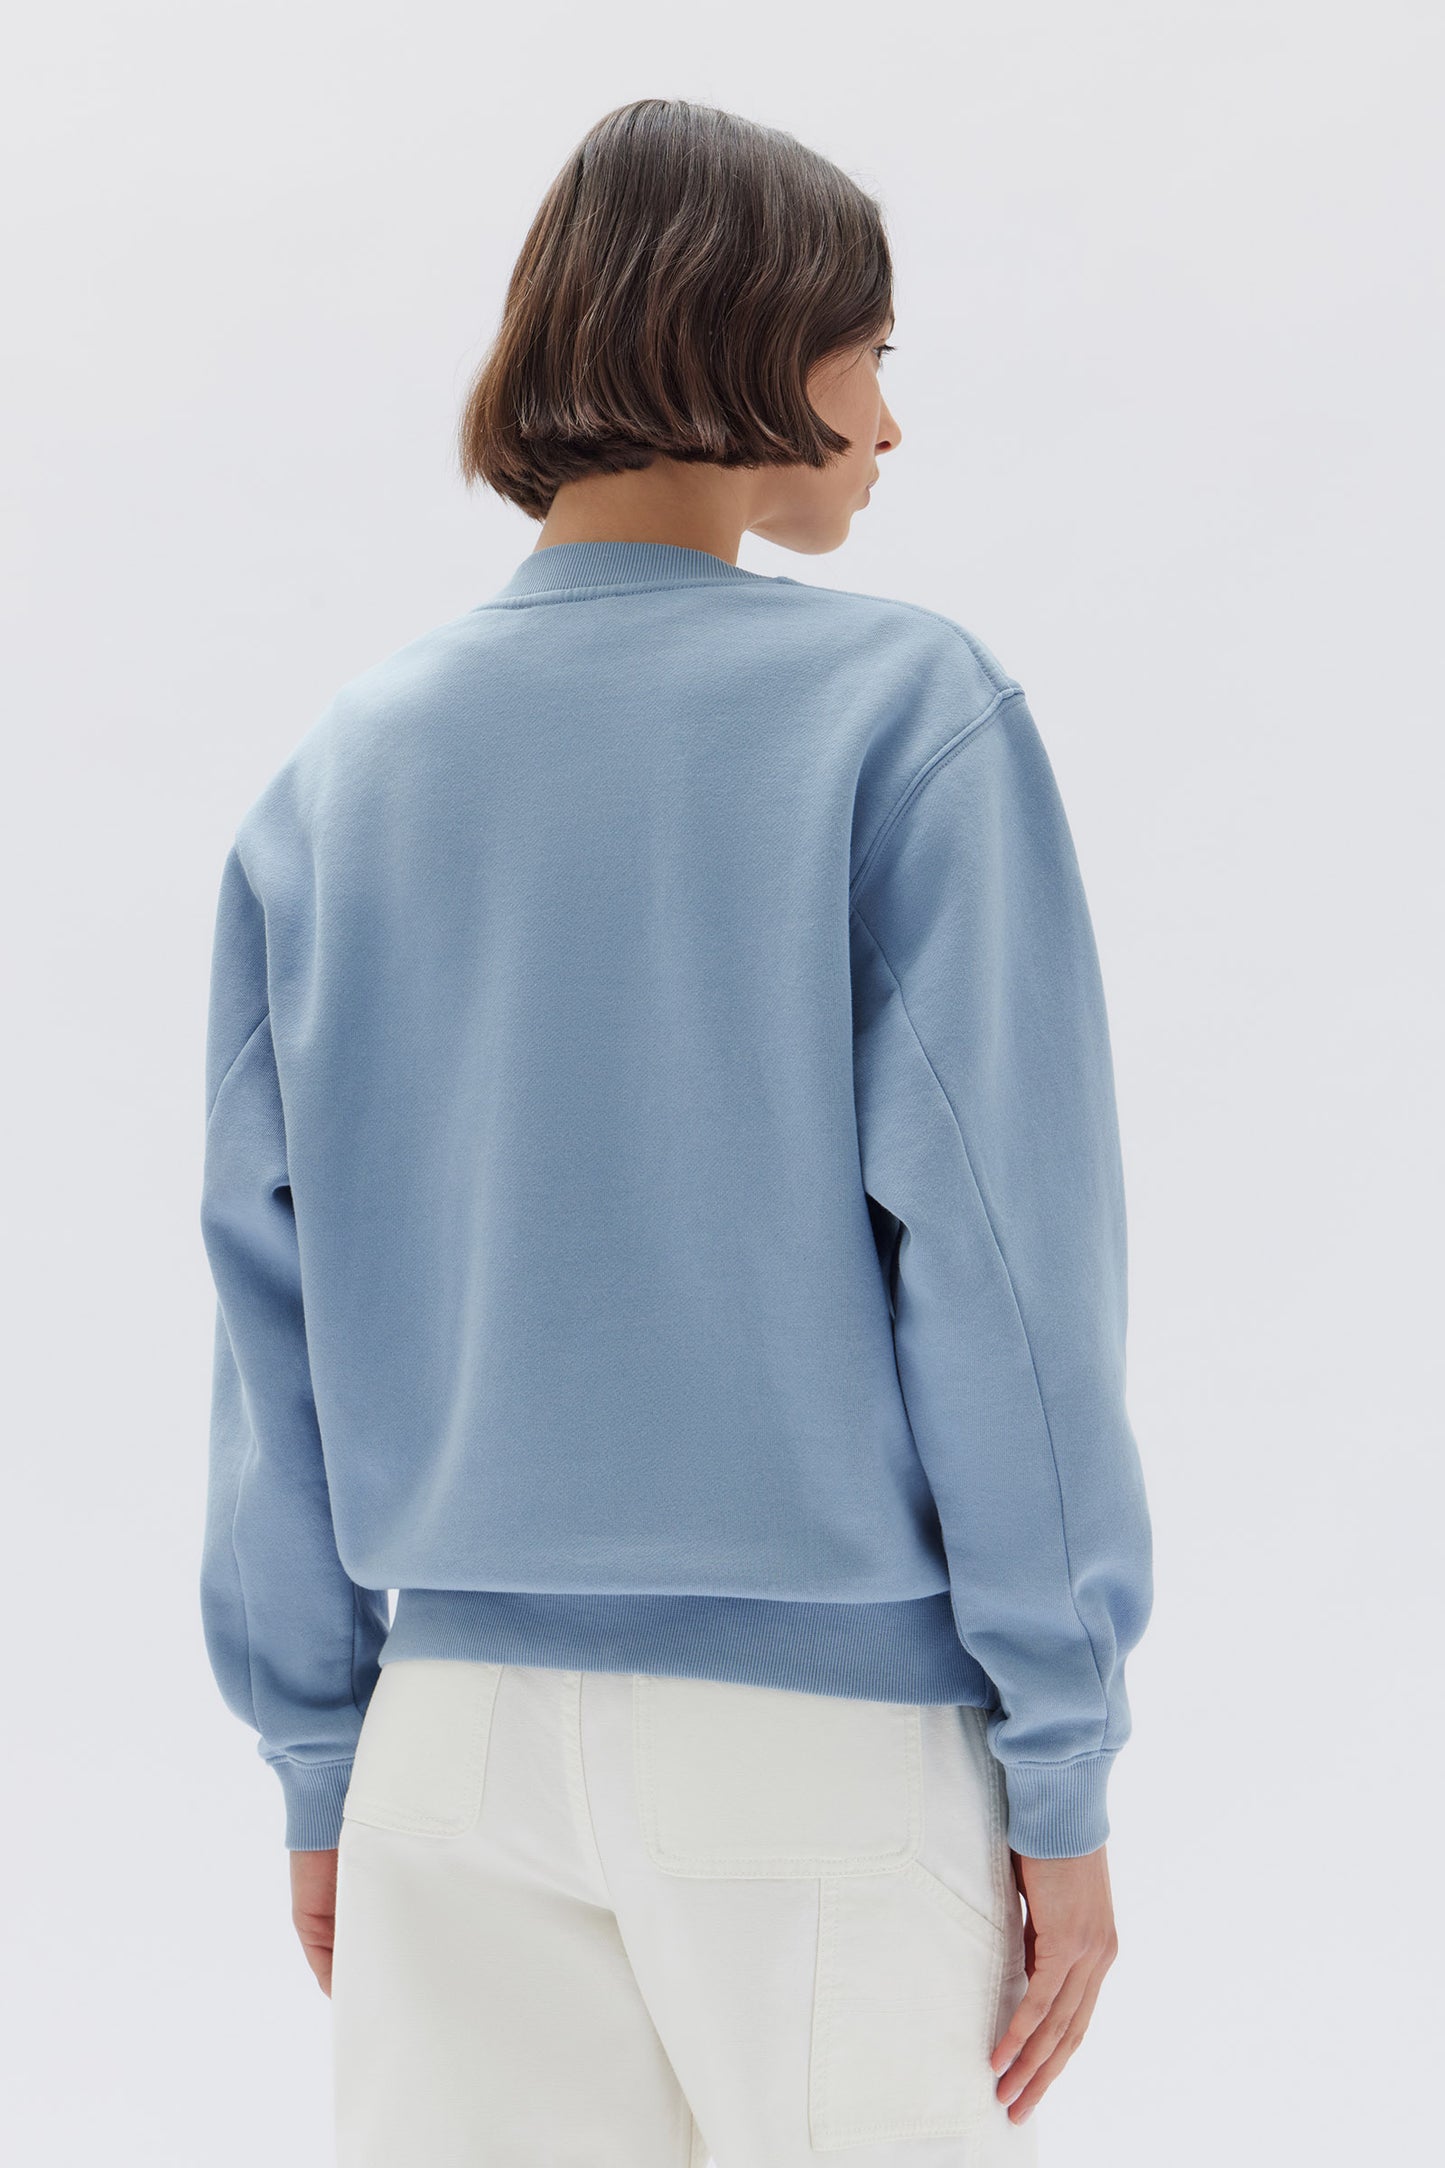 ASSEMBLY LABEL // Womens Stacked Fleece GLACIAL